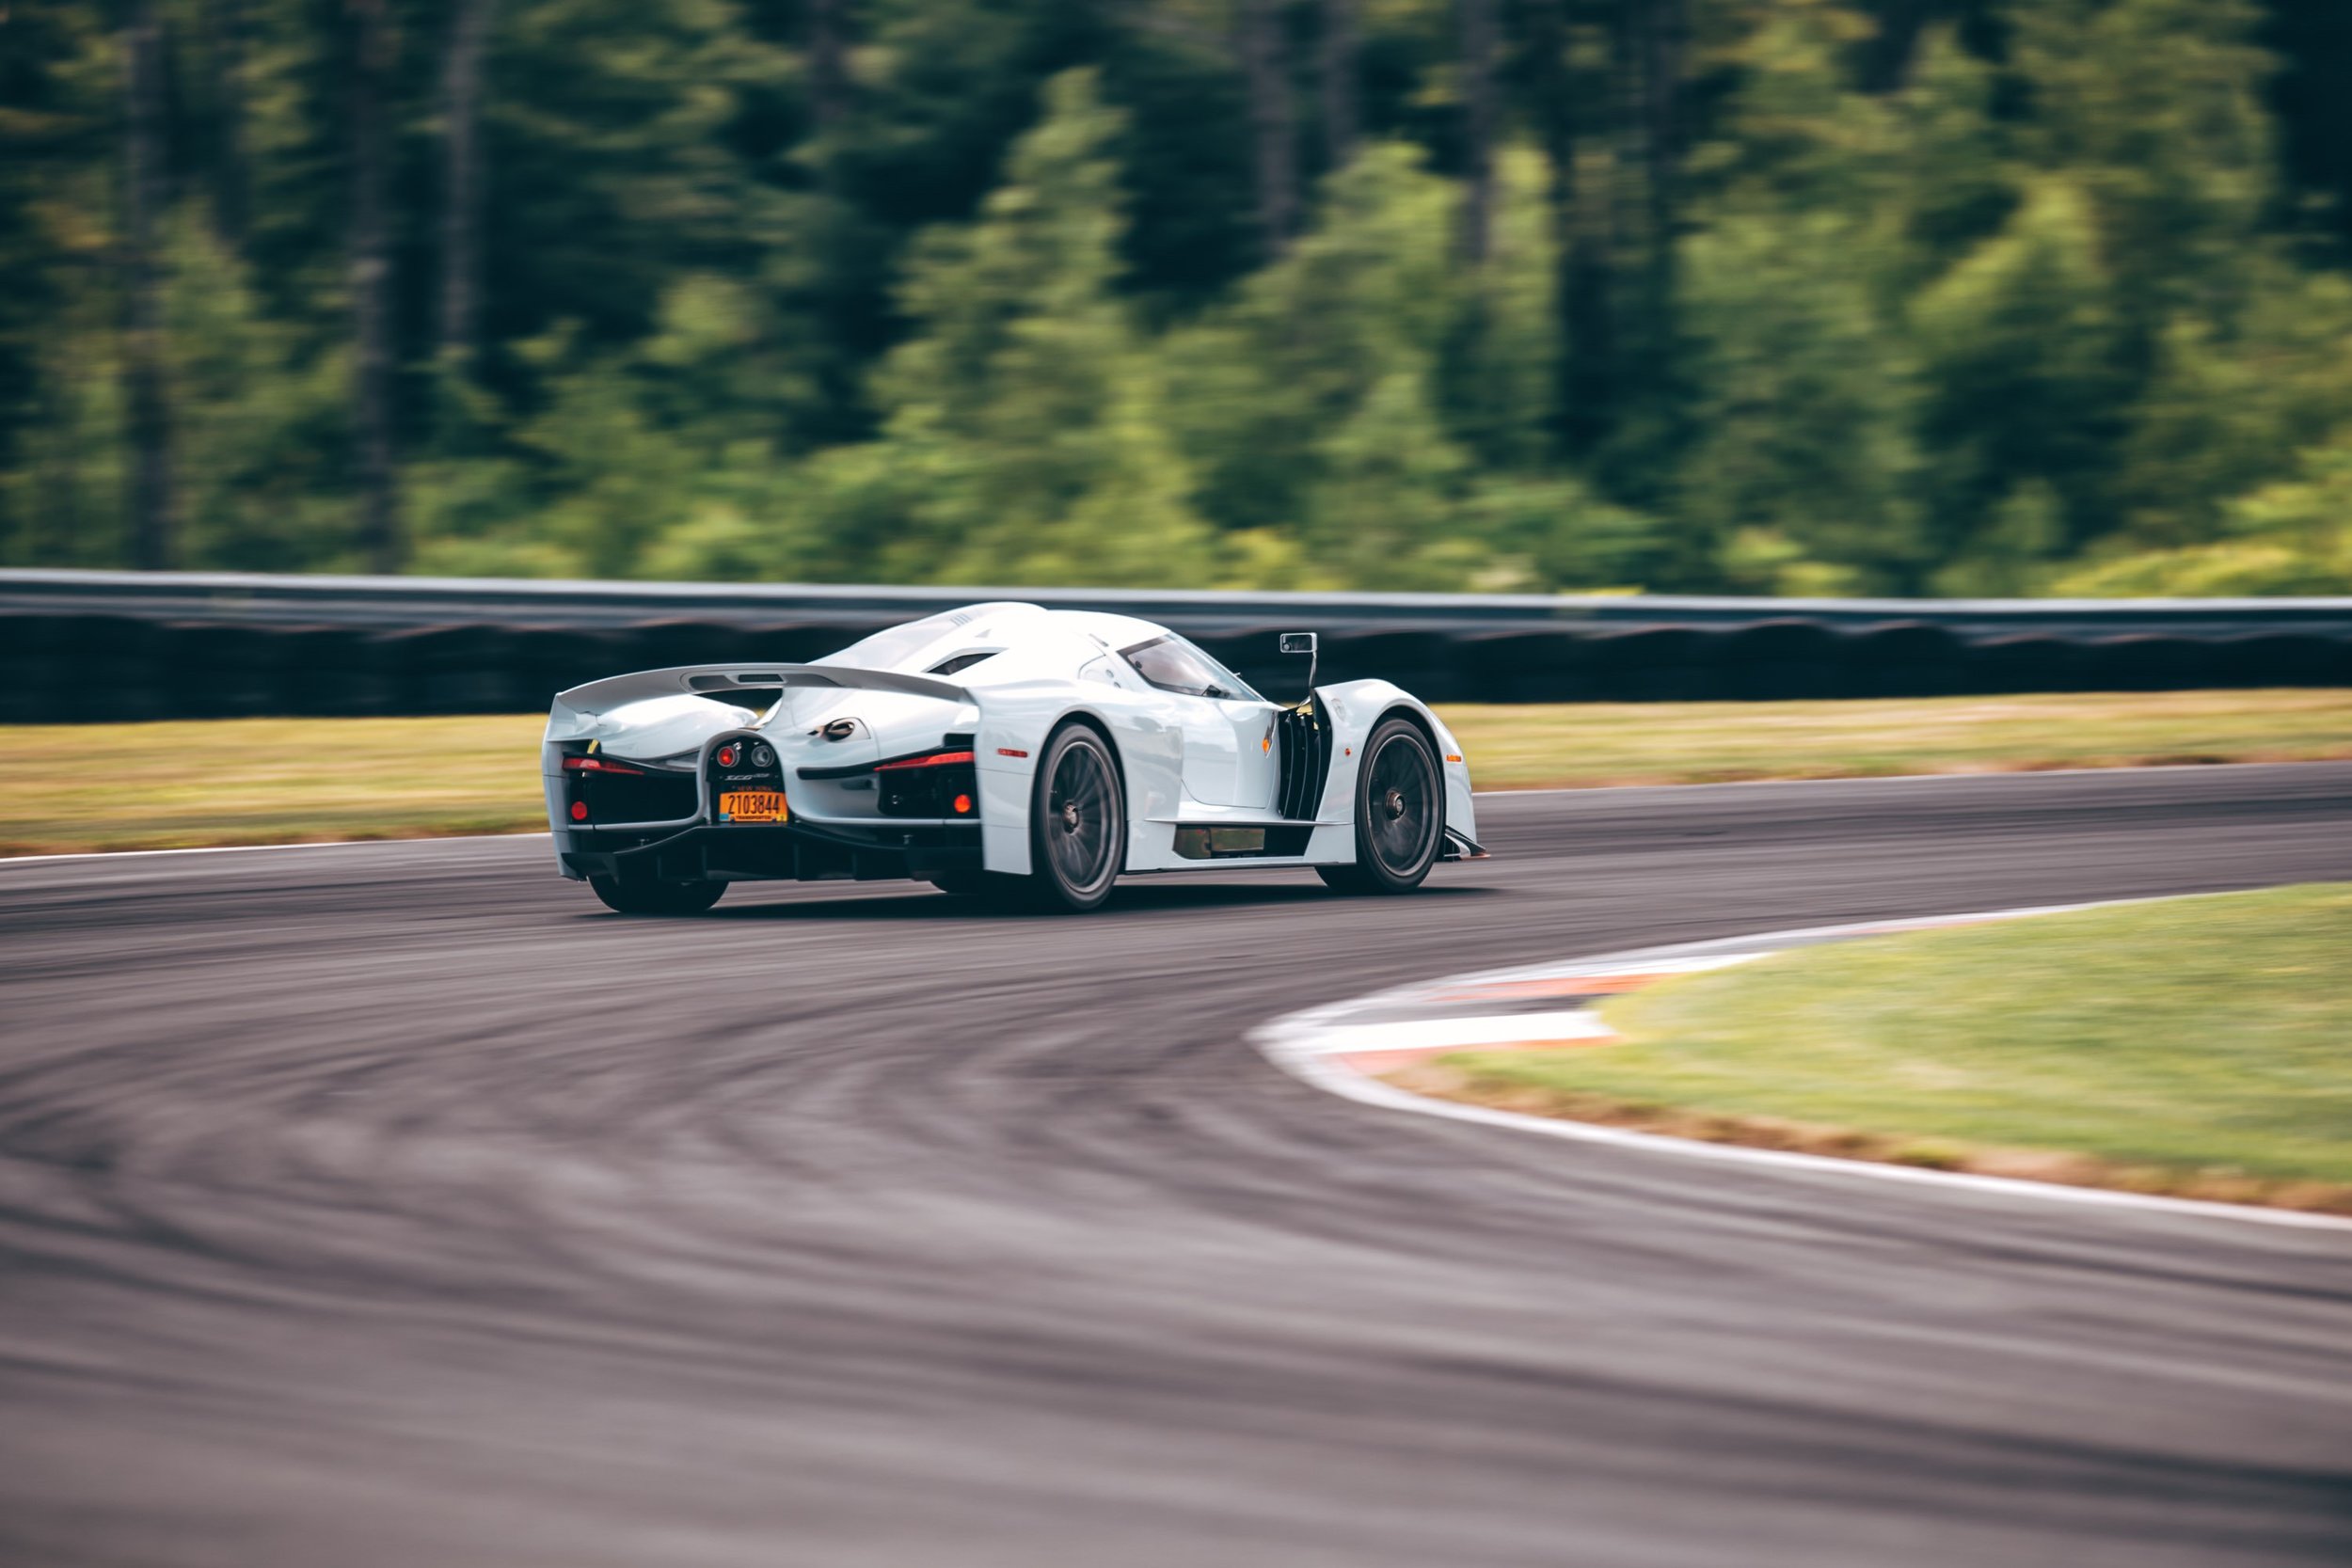 SCG 003S cornering with 2G's of mechanical grip and 1900 pounds of net downforce